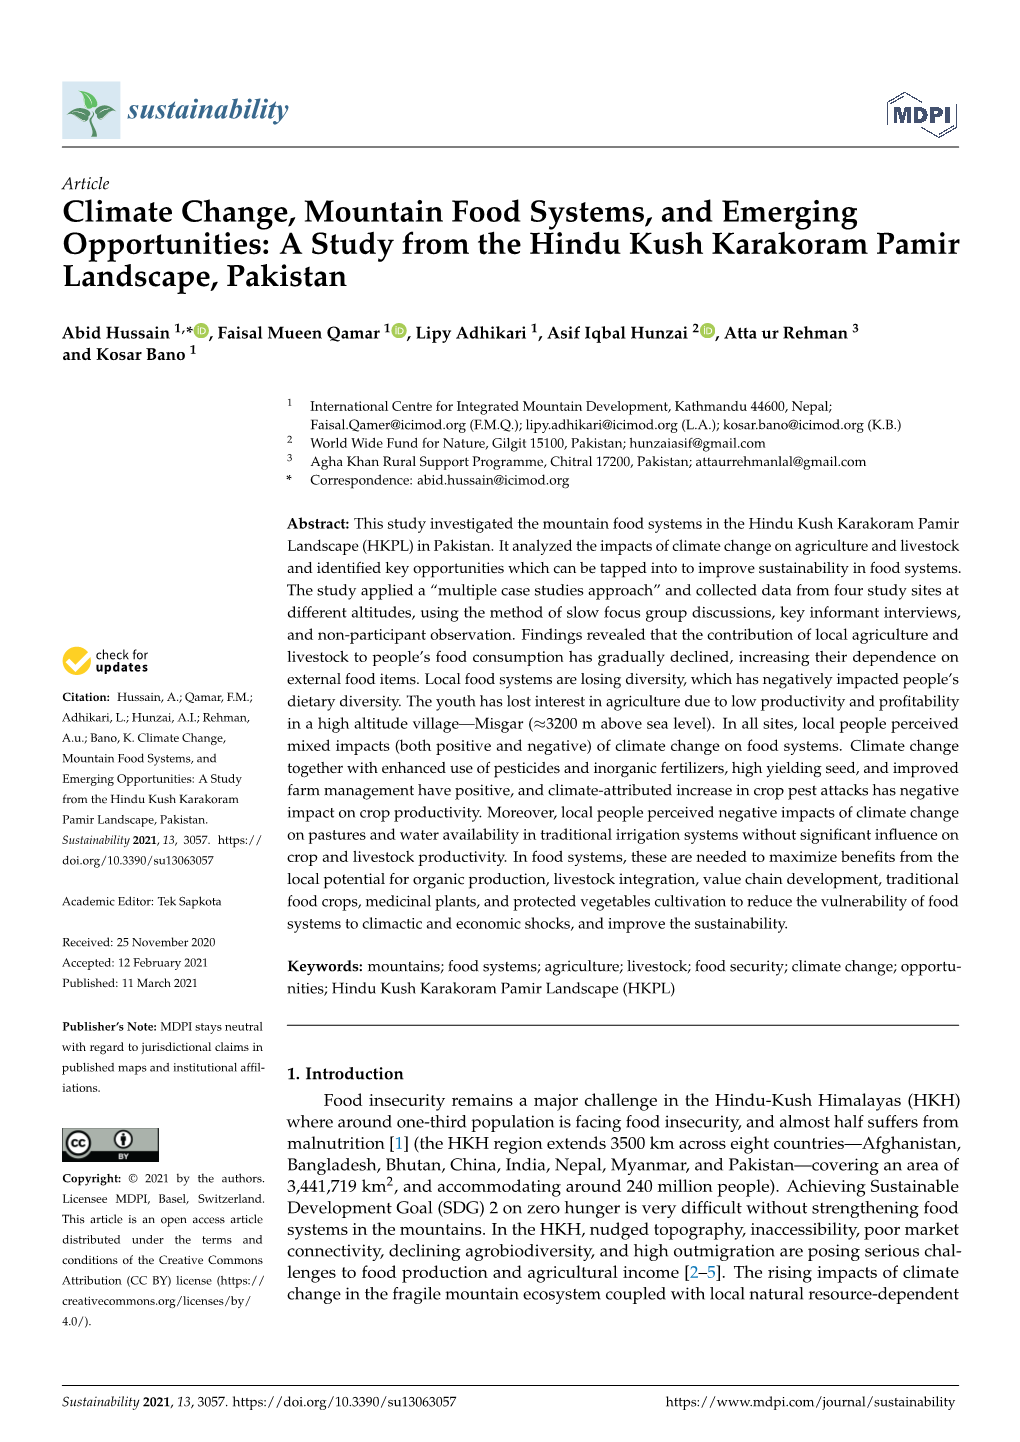 Climate Change, Mountain Food Systems, and Emerging Opportunities: a Study from the Hindu Kush Karakoram Pamir Landscape, Pakistan